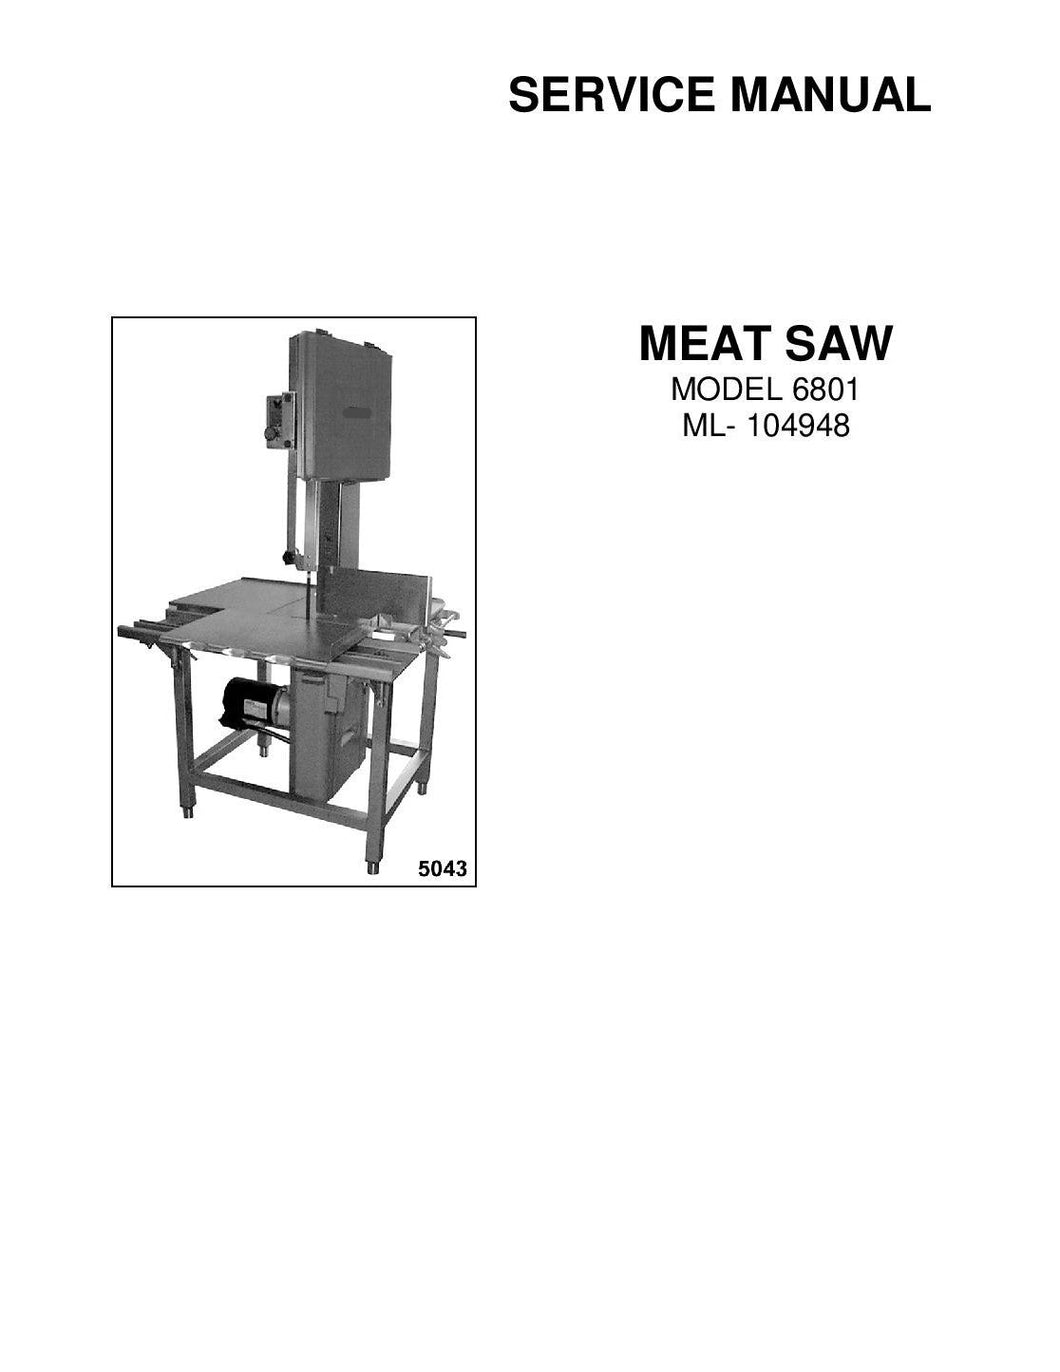 HOBART MODEL 6801, ML- 104948 MEAT SAW SERVICE, TECHNICAL AND REPAIR MANUALS PDF